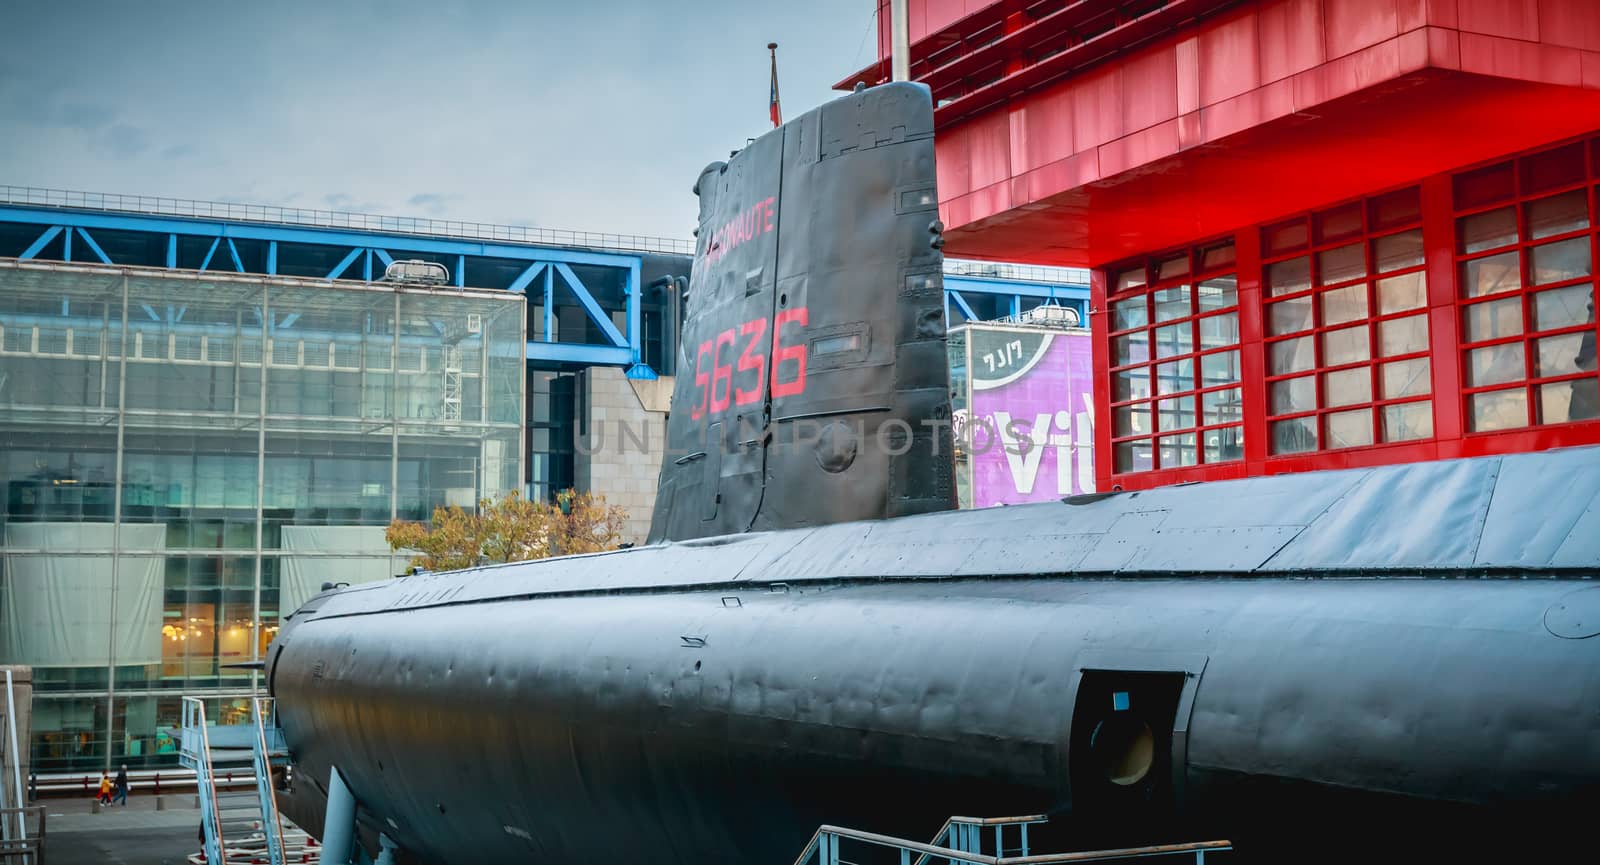 Paris, France - October 6, 2018: exhibition of the Argonaute, French submarine S636 put into service on October 23, 1958 and disarmed on July 31, 1982, opened to the public since 1991 in front of the City of Science and Industry